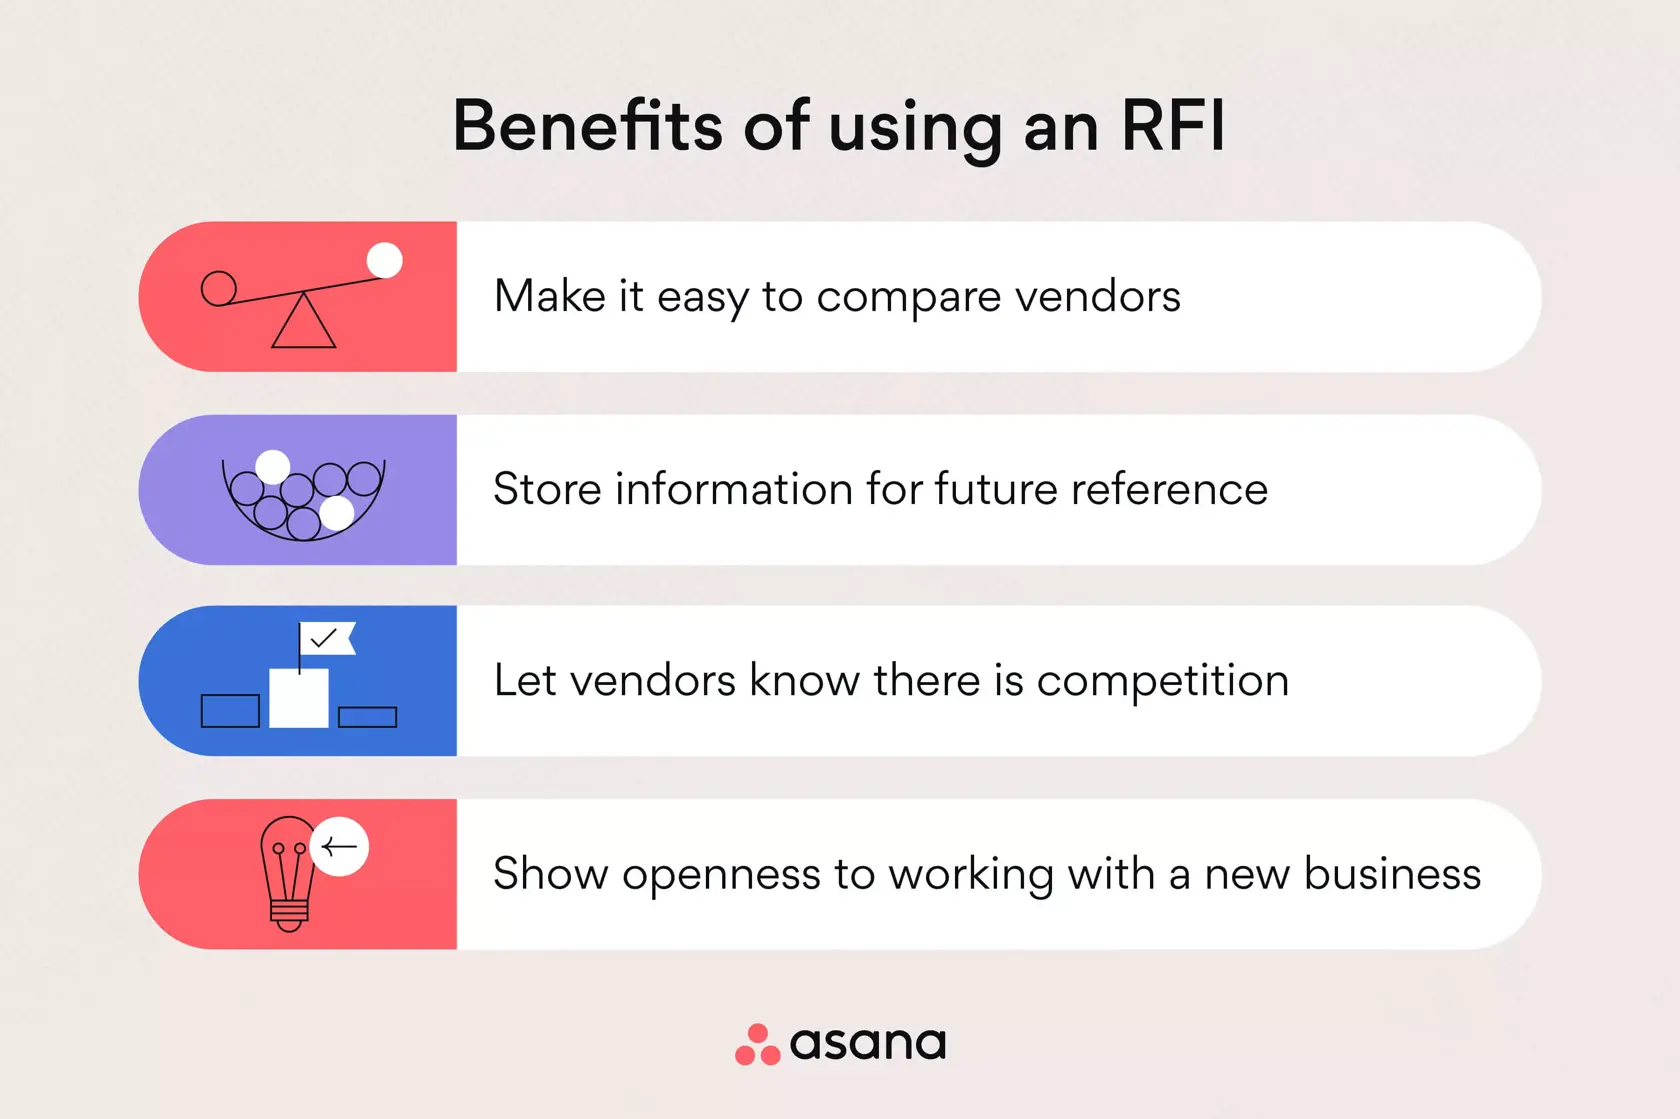 [inline illustration] Benefits of using an RFI (infographic)